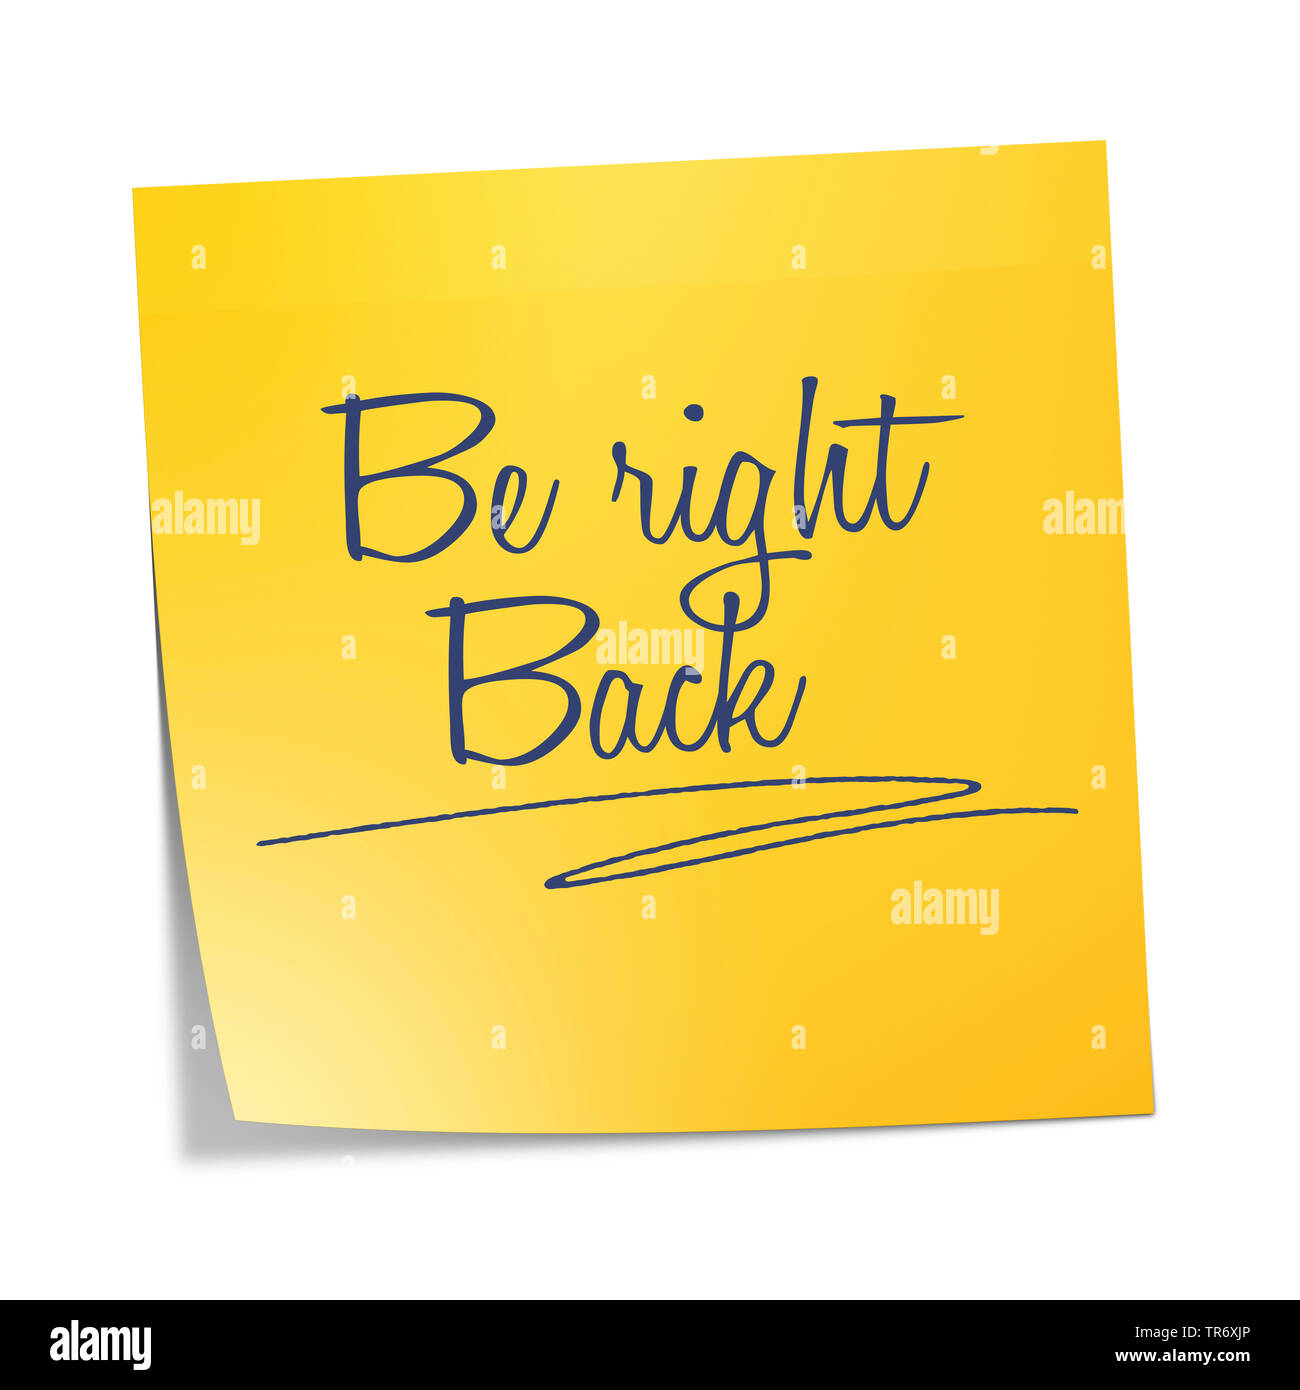 Download 3d Computer Graphic Memo In Yellow Color Reading Be Right Back Stock Photo Alamy Yellowimages Mockups